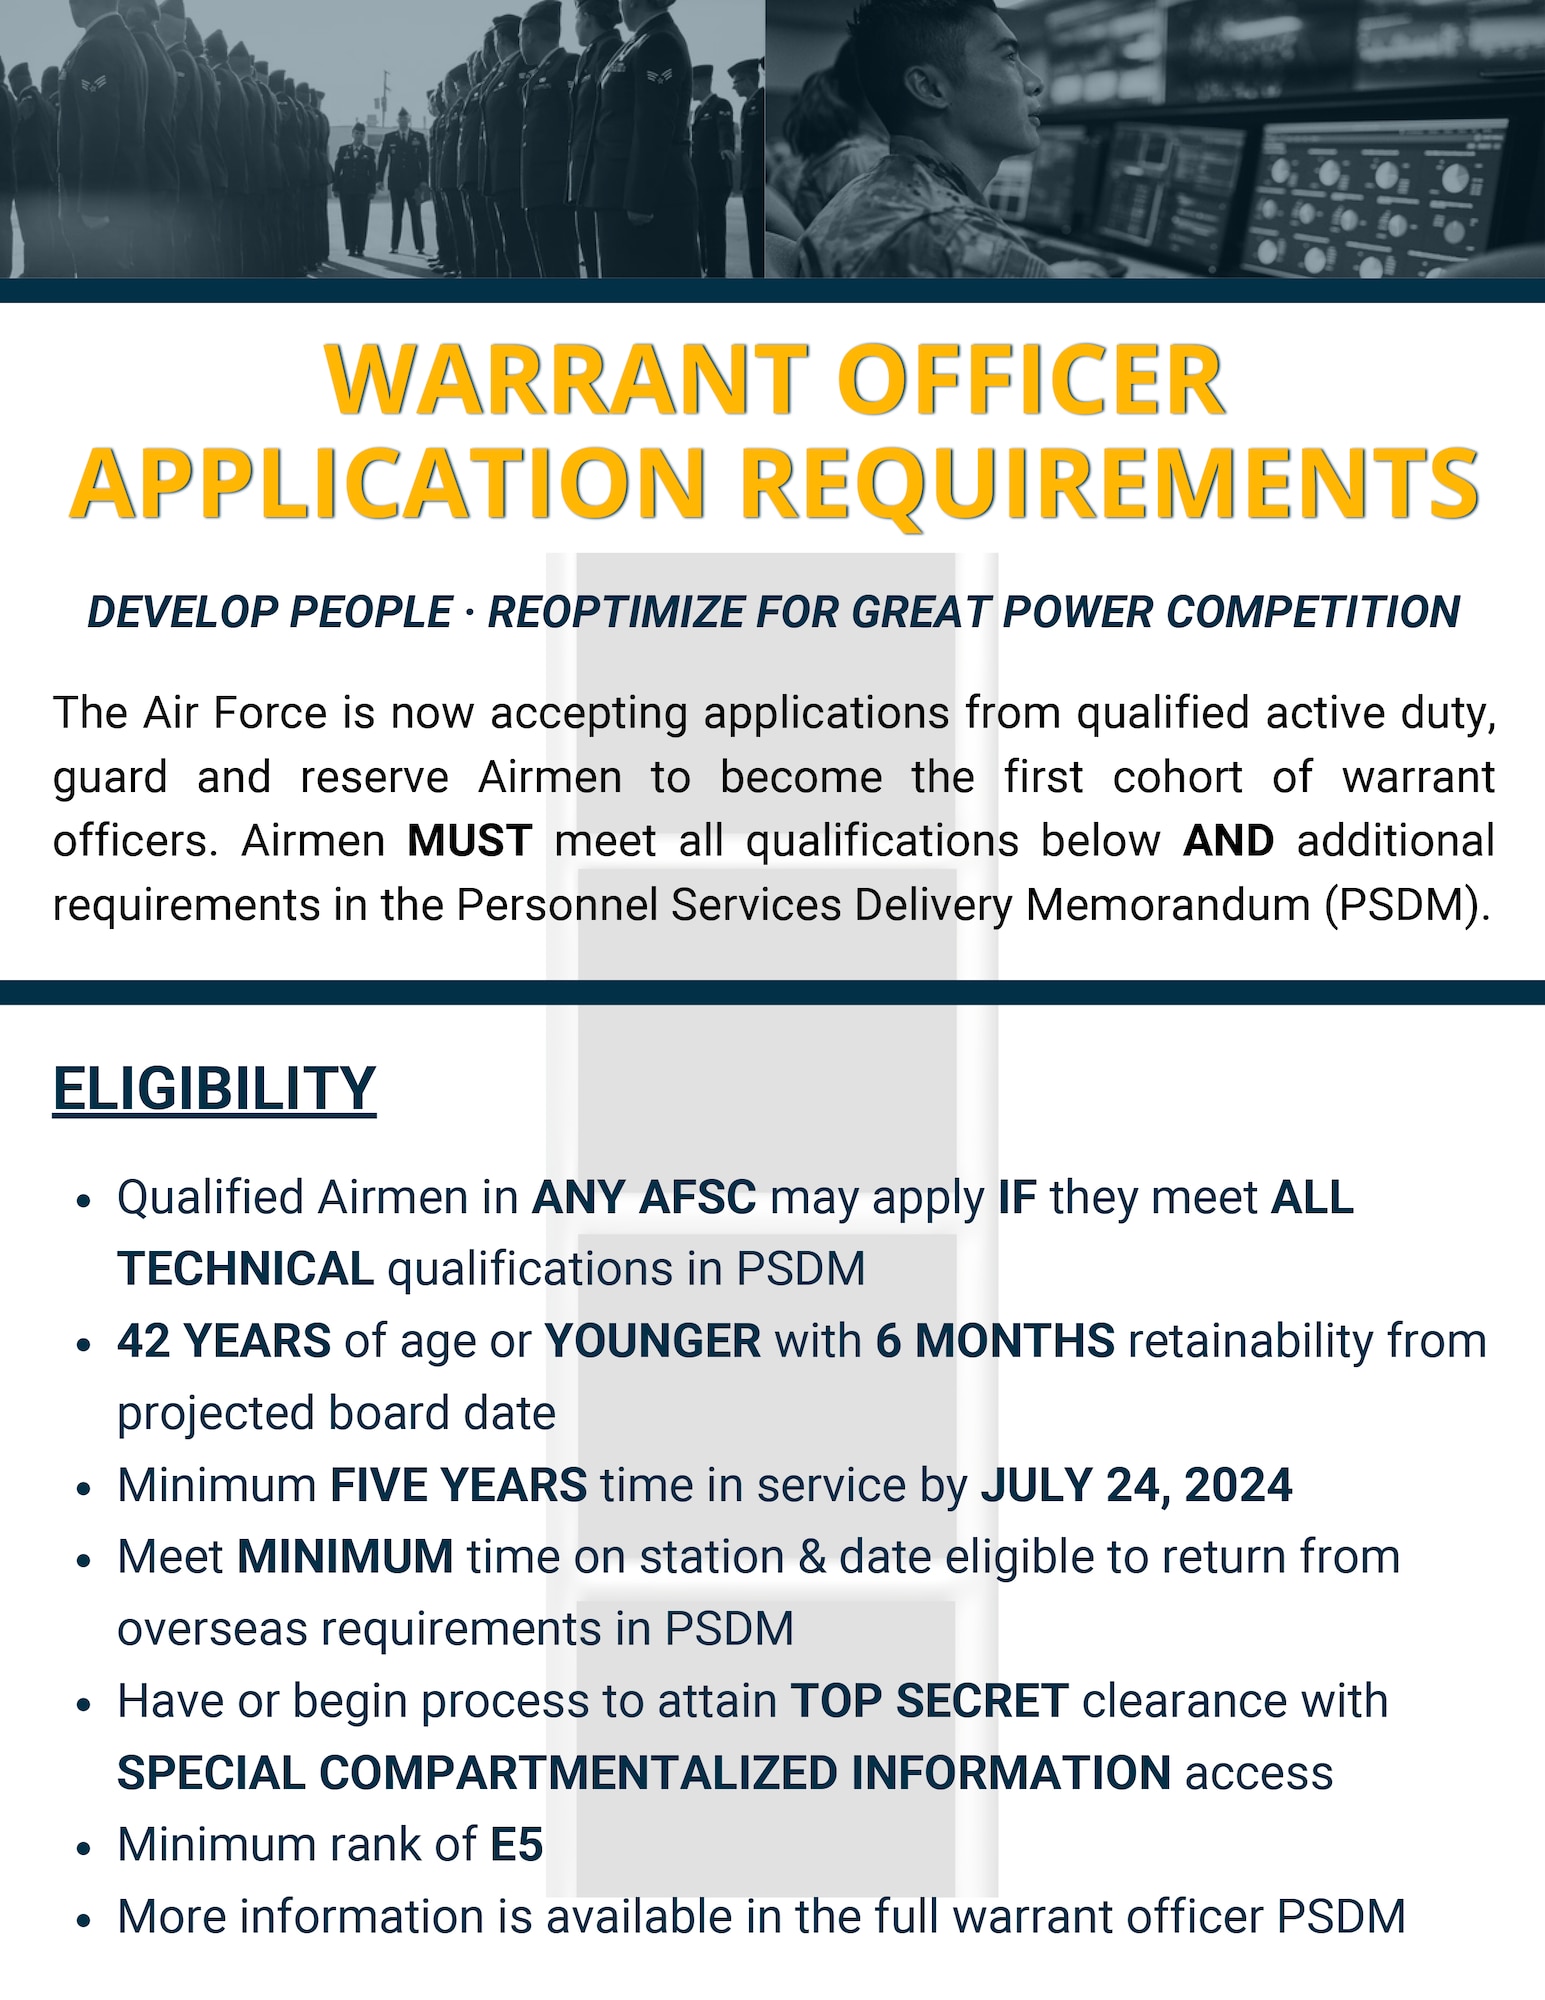 The Air Force is now accepting applications, from April 25 to May 31, for Airmen aspiring to become the inaugural cohort of warrant officers in the information technology and cyber career fields.